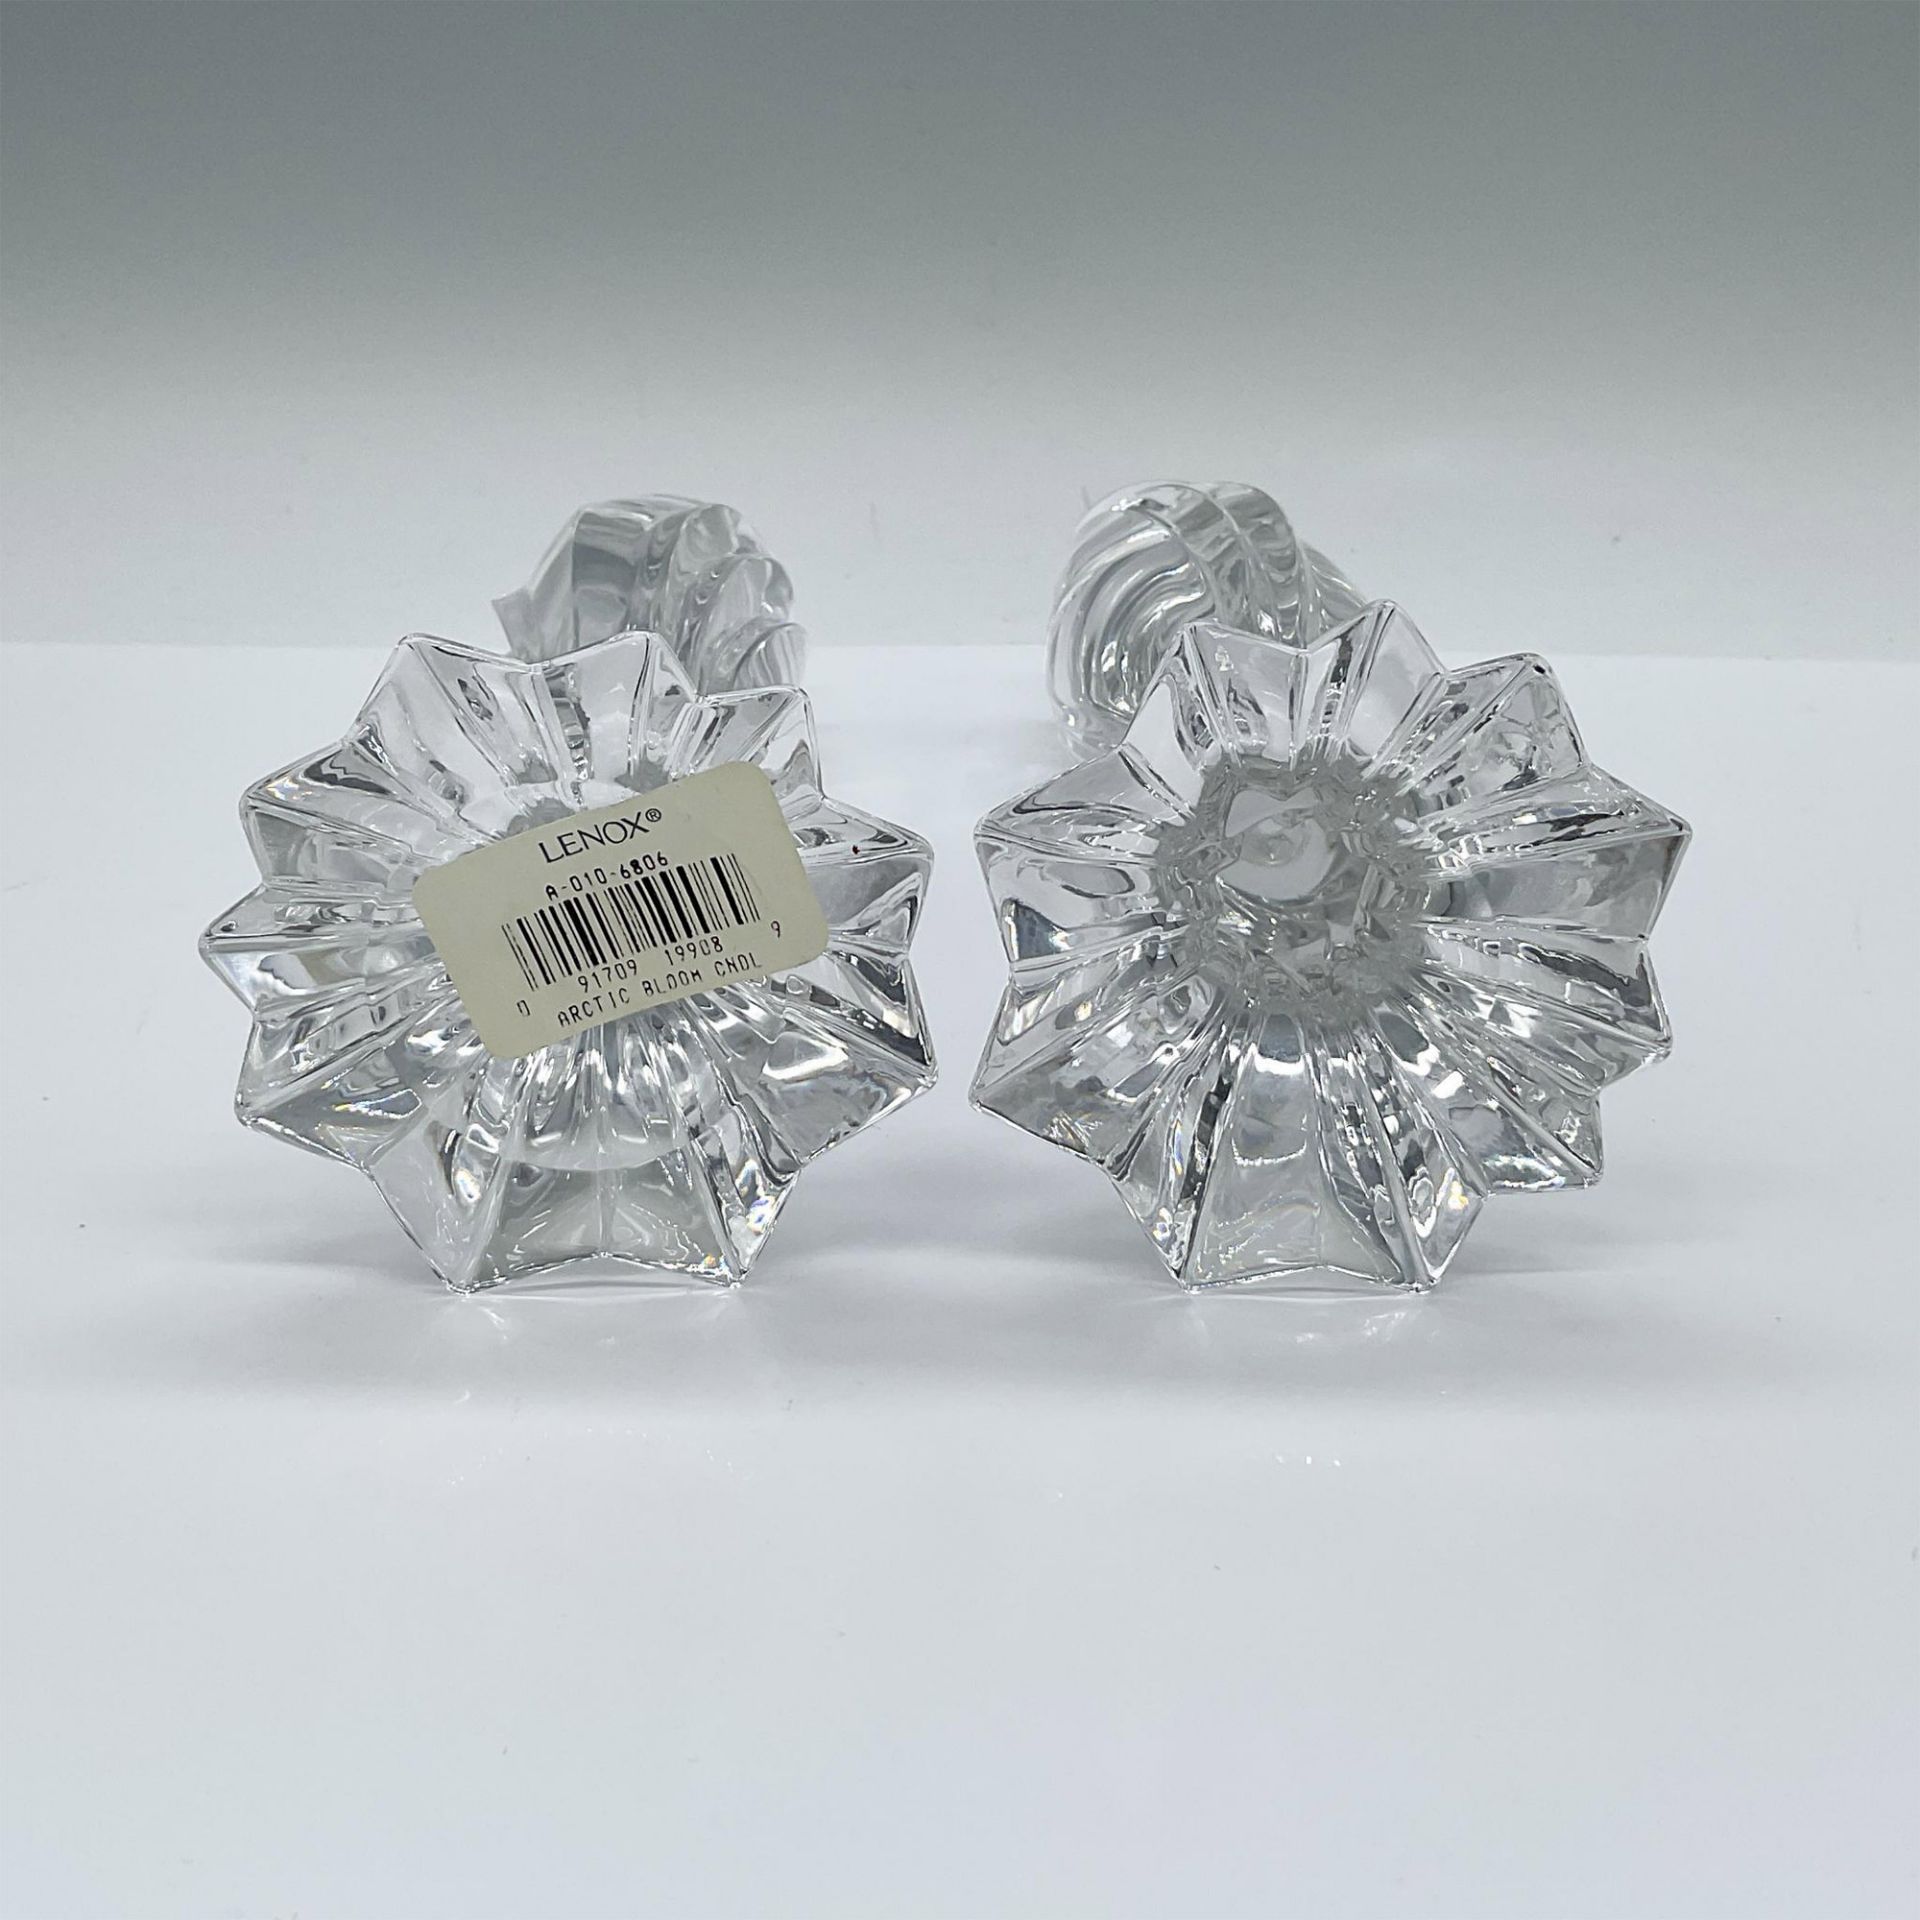 Pair of Lenox Glass Candlestick Holders, Artic Bloom - Image 3 of 3